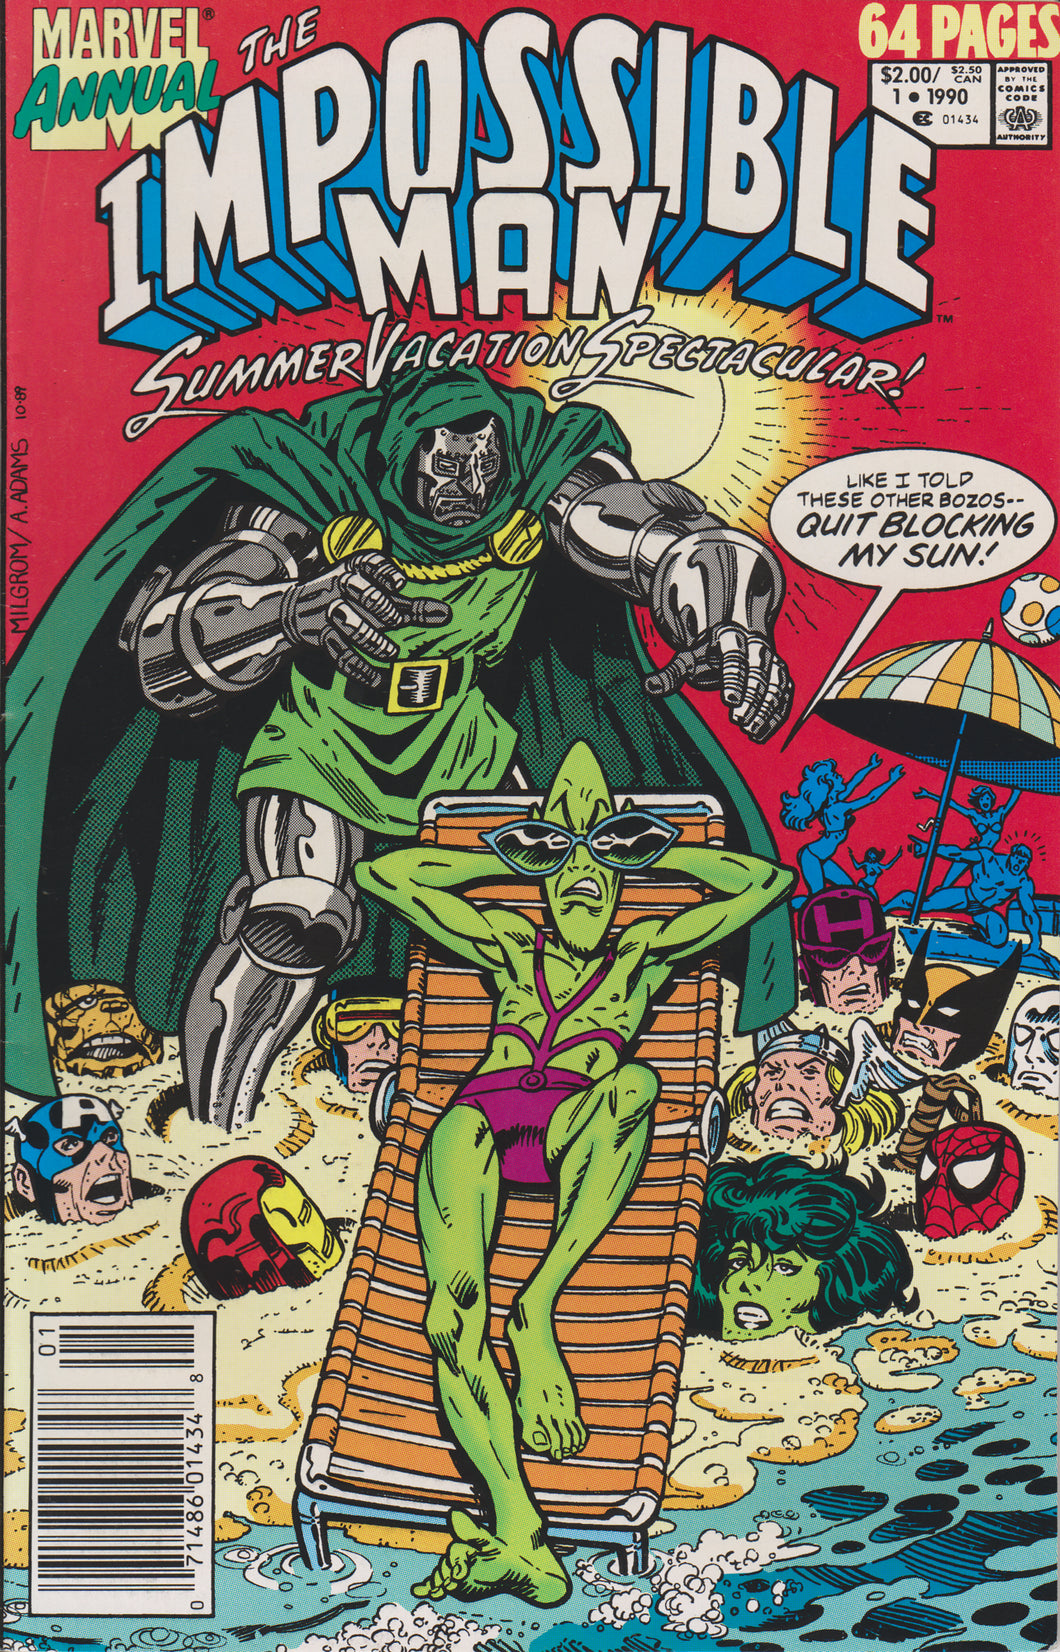 THE IMPOSSIBLE MAN SUMMER VACATION SPECTACULAR #1 ~ Marvel Comics